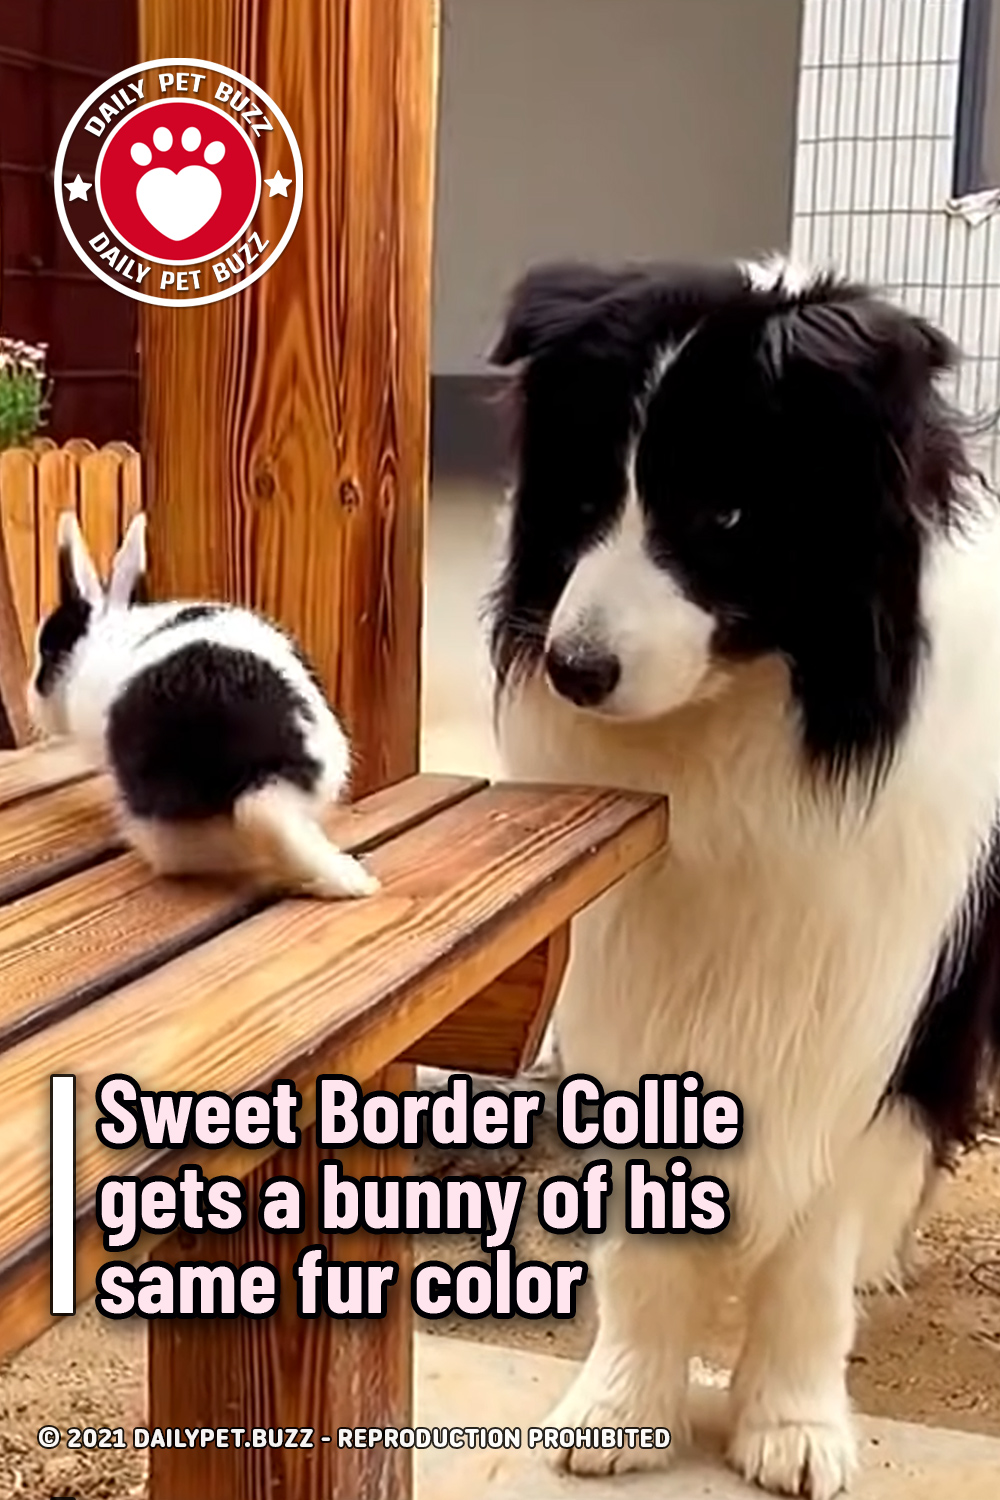 Sweet Border Collie gets a bunny of his same fur color